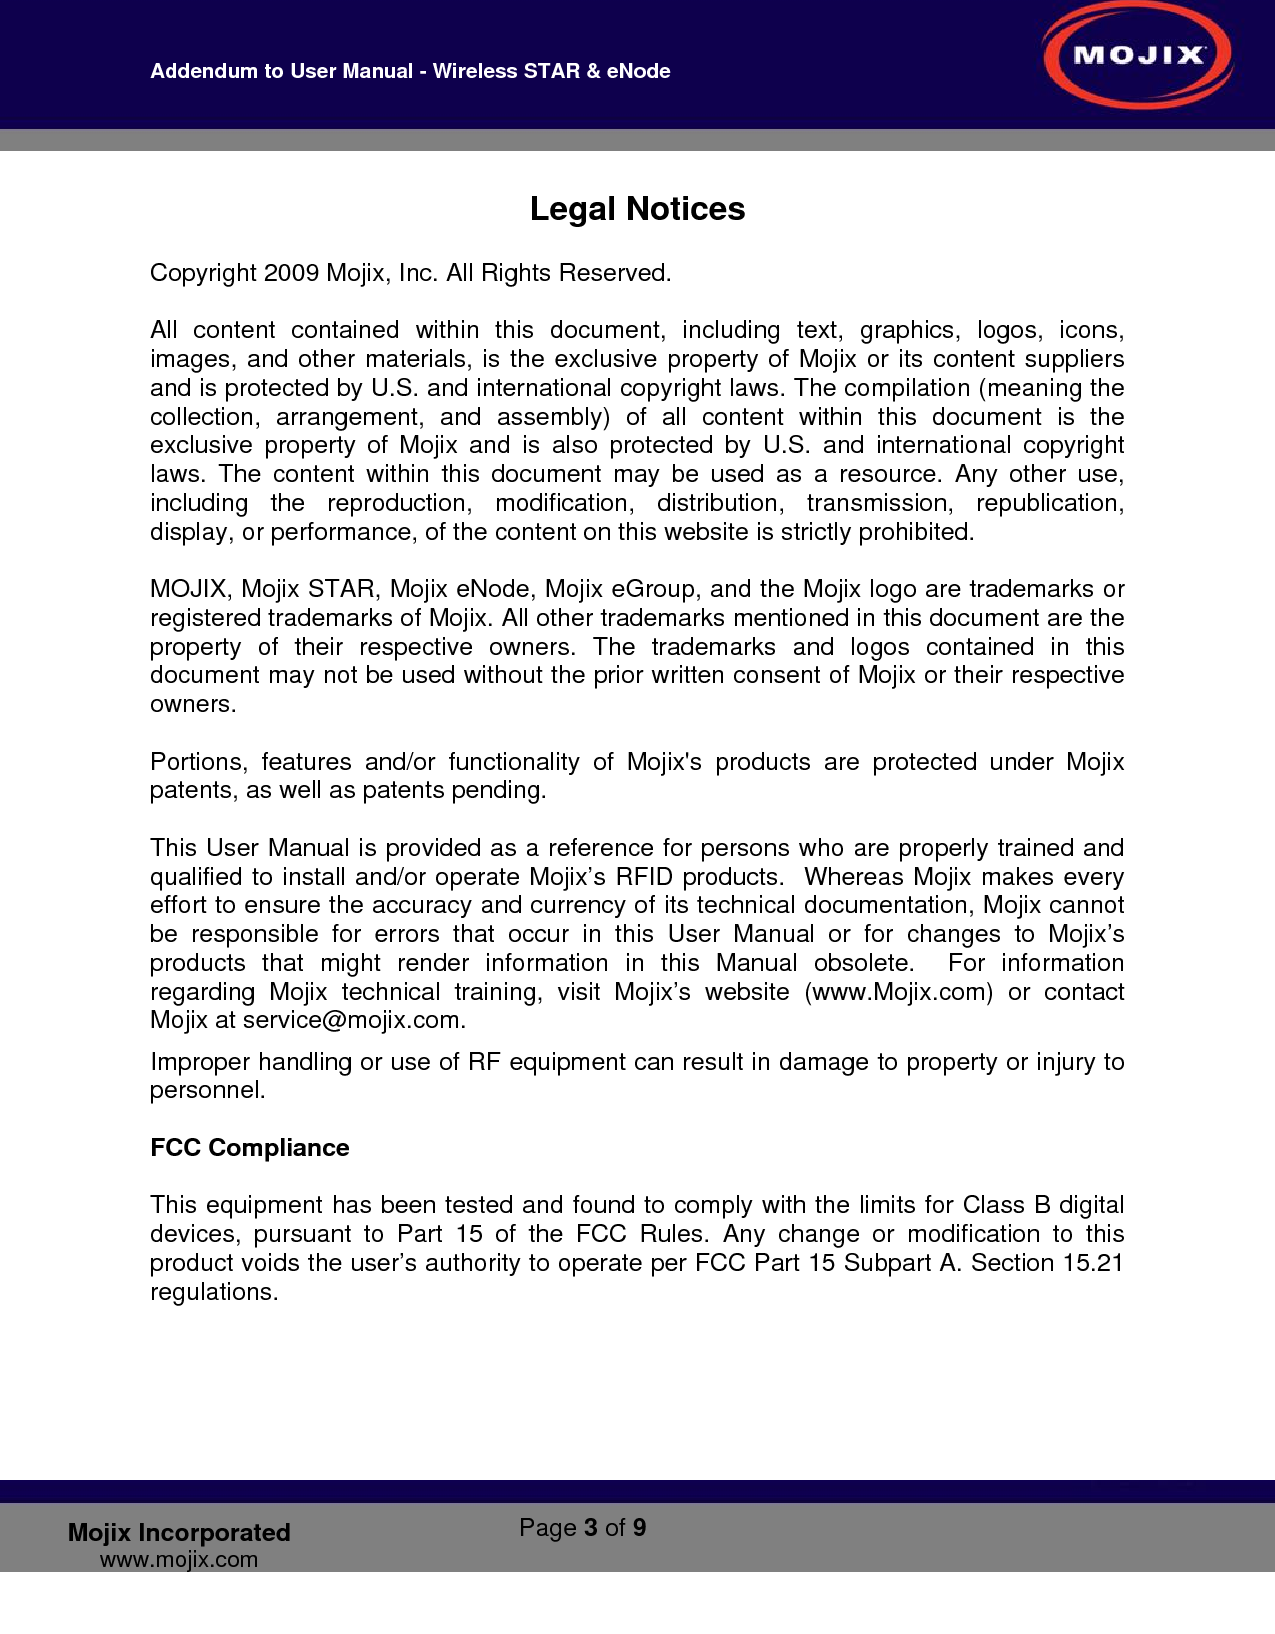 Addendum to User Manual - Wireless STAR &amp; eNode        Page 3 of 9   Mojix Incorporated www.mojix.com Legal Notices  Copyright 2009 Mojix, Inc. All Rights Reserved.  All content contained within this document, including text, graphics, logos, icons, images, and other materials, is the exclusive property of Mojix or its content suppliers and is protected by U.S. and international copyright laws. The compilation (meaning the collection, arrangement, and assembly) of all content within this document is the exclusive property of Mojix and is also protected by U.S. and international copyright laws. The content within this document may be used as a resource. Any other use, including the reproduction, modification, distribution, transmission, republication, display, or performance, of the content on this website is strictly prohibited.  MOJIX, Mojix STAR, Mojix eNode, Mojix eGroup, and the Mojix logo are trademarks or registered trademarks of Mojix. All other trademarks mentioned in this document are the property of their respective owners. The trademarks and logos contained in this document may not be used without the prior written consent of Mojix or their respective owners.   Portions, features and/or functionality of Mojix&apos;s products are protected under Mojix patents, as well as patents pending.  This User Manual is provided as a reference for persons who are properly trained and qualified to install and/or operate Mojix’s RFID products.  Whereas Mojix makes every effort to ensure the accuracy and currency of its technical documentation, Mojix cannot be responsible for errors that occur in this User Manual or for changes to Mojix’s products that might render information in this Manual obsolete.  For information regarding Mojix technical training, visit Mojix’s website (www.Mojix.com) or contact Mojix at service@mojix.com. Improper handling or use of RF equipment can result in damage to property or injury to personnel.  FCC Compliance  This equipment has been tested and found to comply with the limits for Class B digital devices, pursuant to Part 15 of the FCC Rules. Any change or modification to this product voids the user’s authority to operate per FCC Part 15 Subpart A. Section 15.21 regulations.      